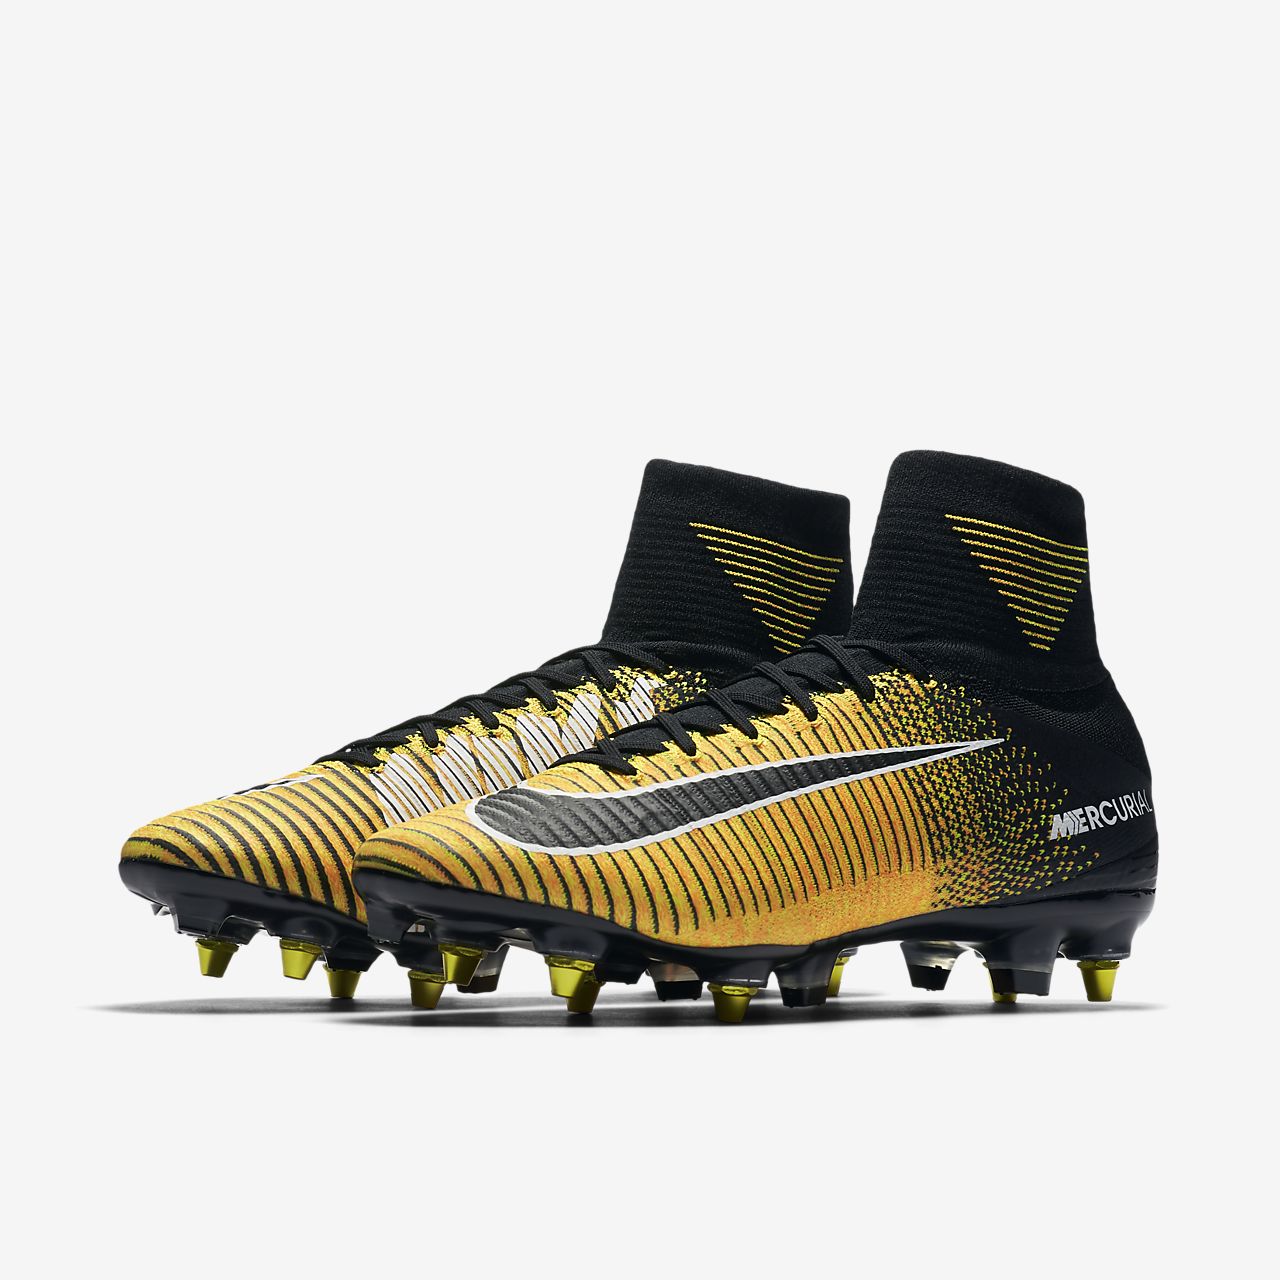 Nike Mercurial Superfly 6 Academy Sgpro Football Boots in.